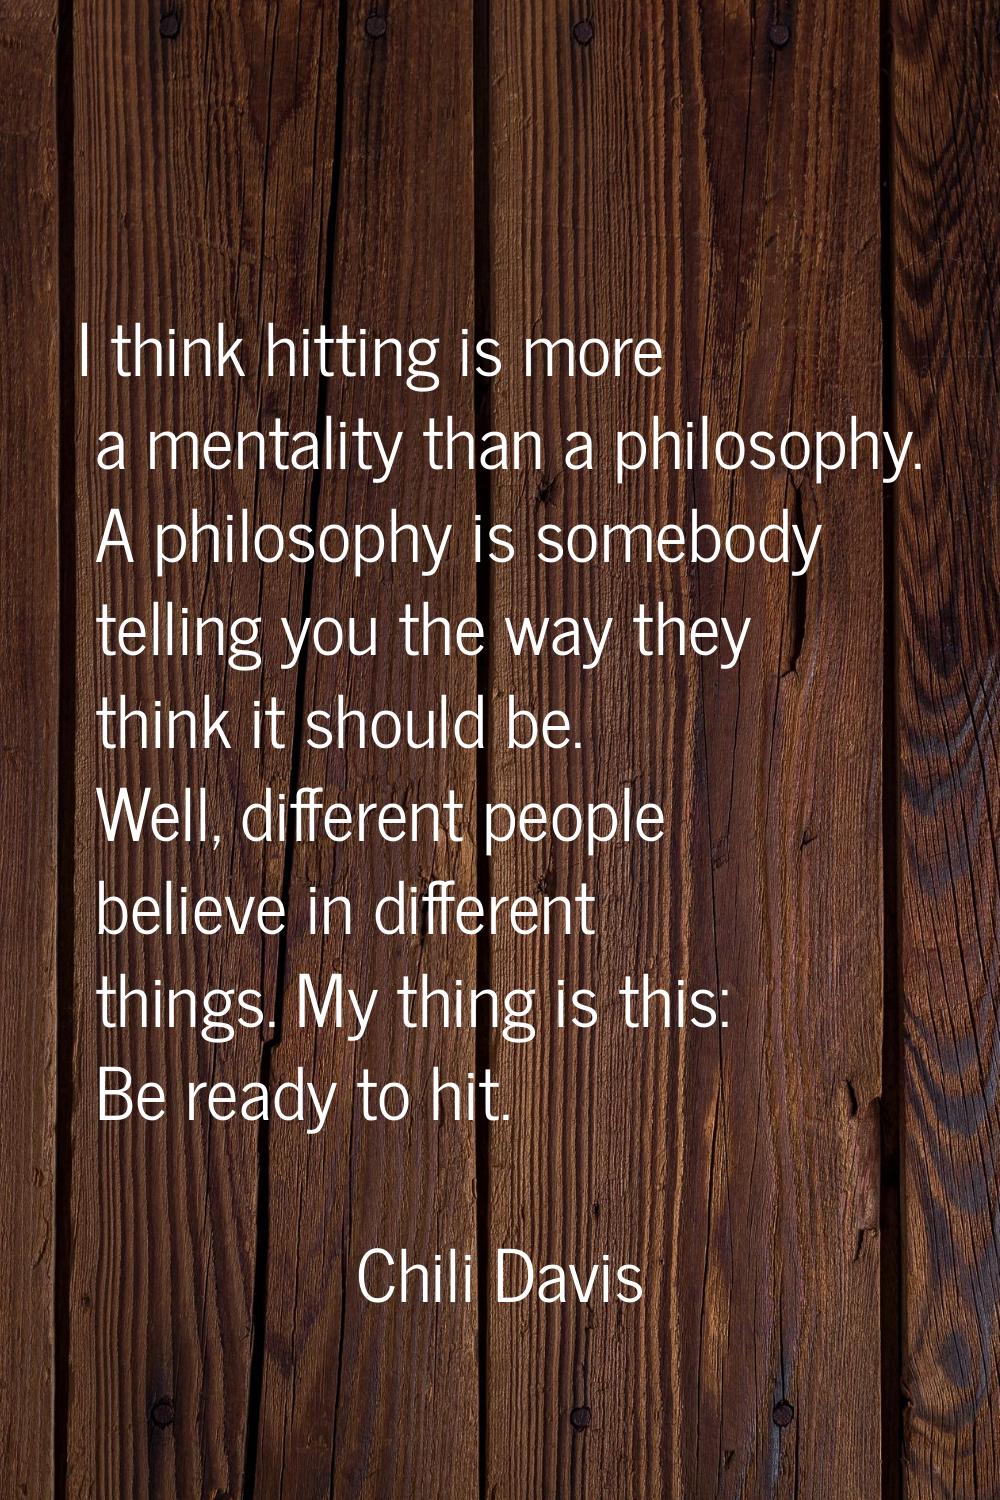 I think hitting is more a mentality than a philosophy. A philosophy is somebody telling you the way